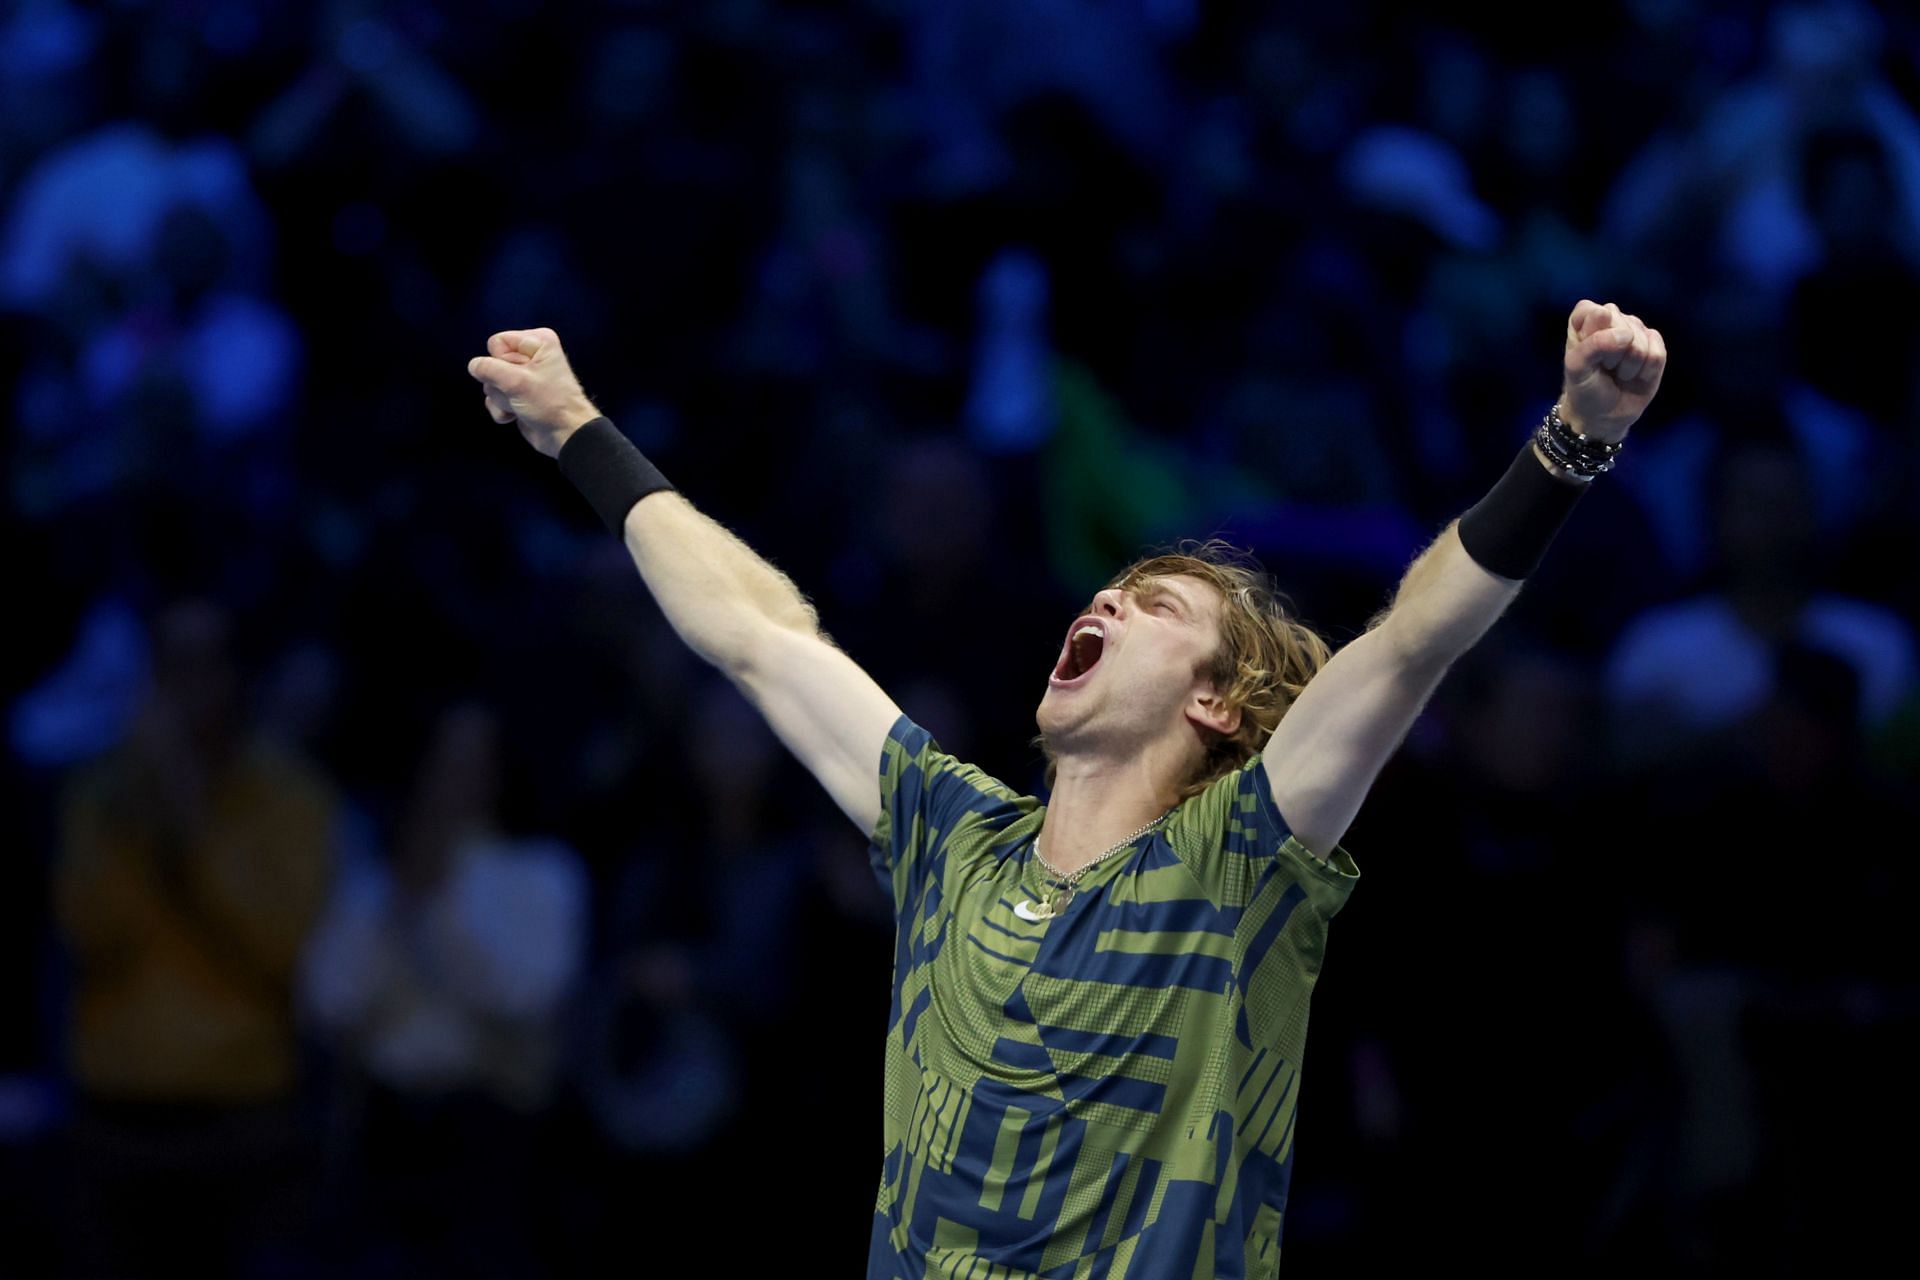 Andrey Rublev celebrates after beating Stefanos Tsitispas at the Nitto ATP Finals in Turin.